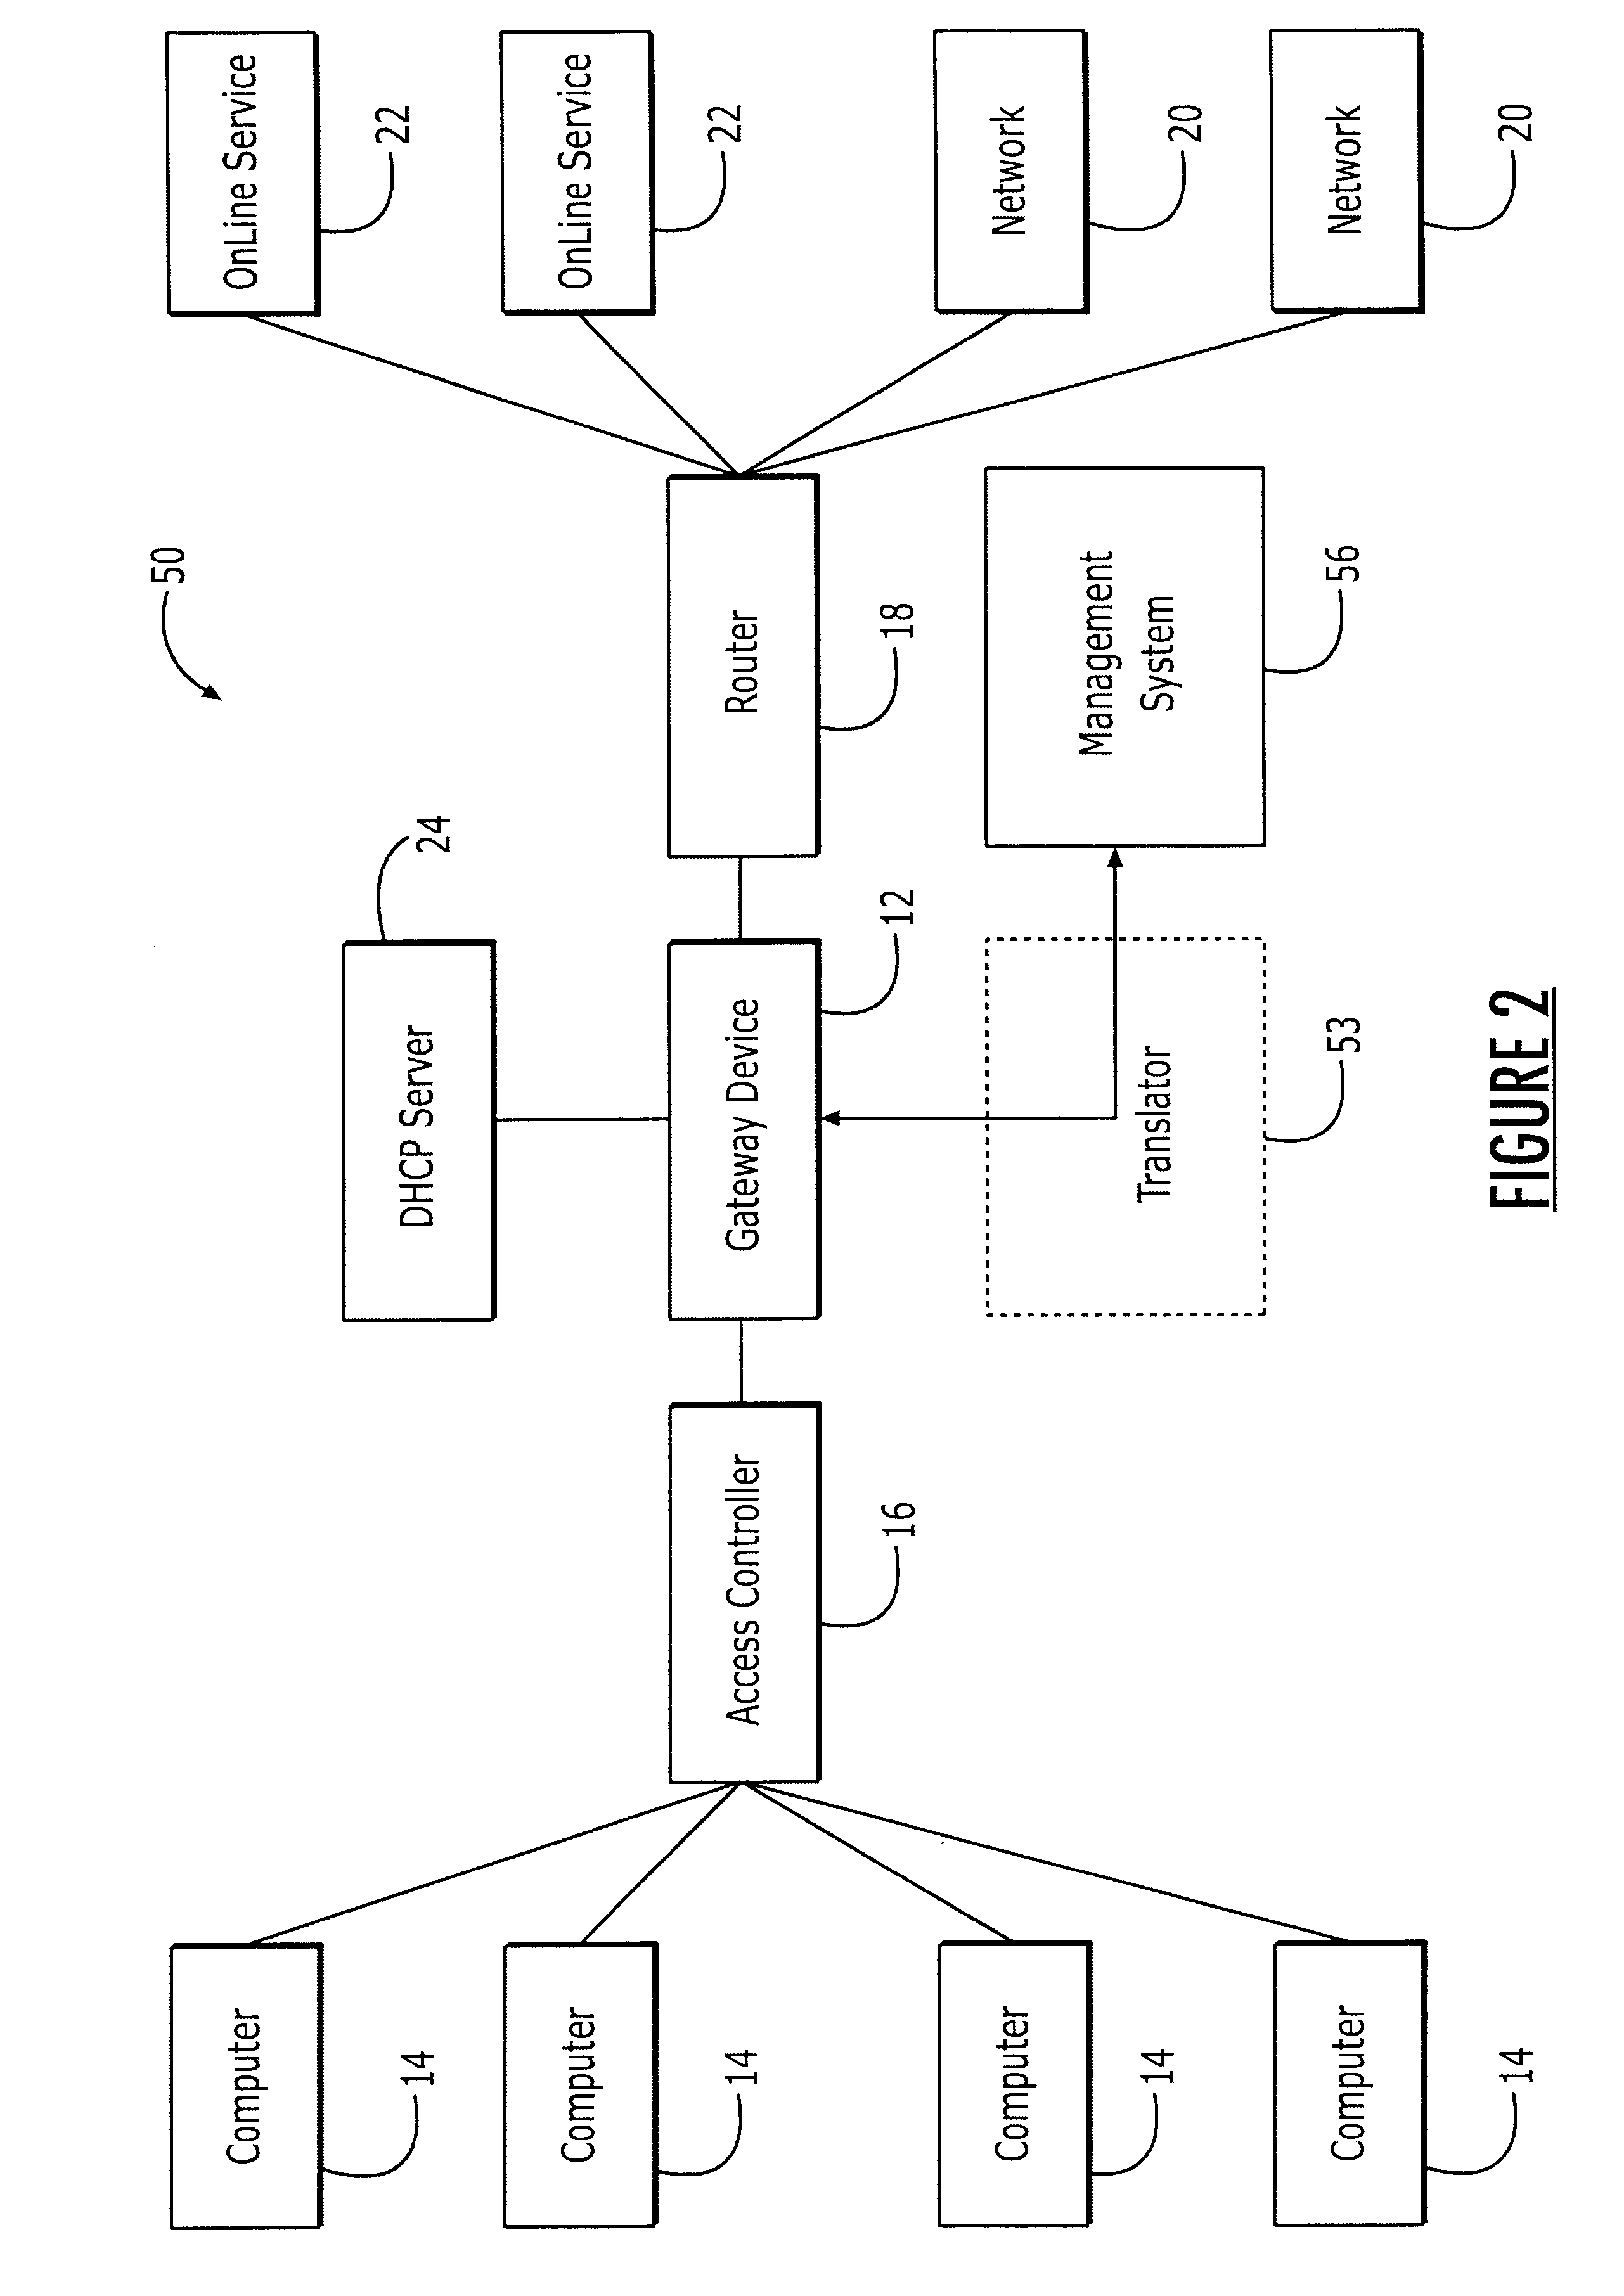 Systems and methods for integrating a network gateway device with management systems